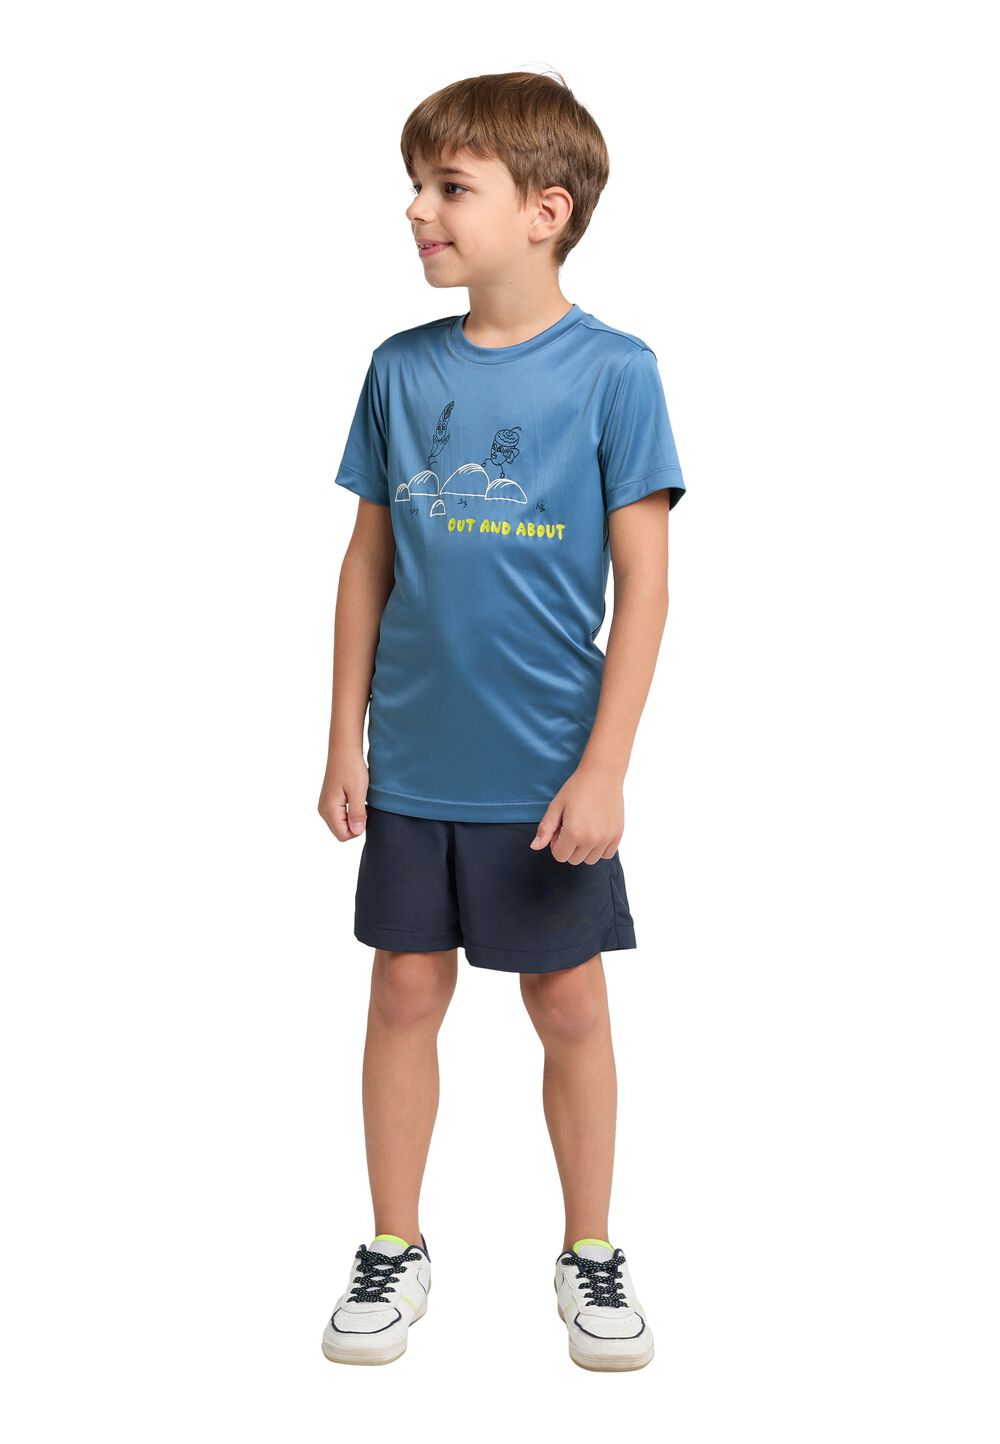 Jack Wolfskin OUT AND About T-Shirt Kids Functioneel shirt Kinderen 152 ele tal blue ele tal blue